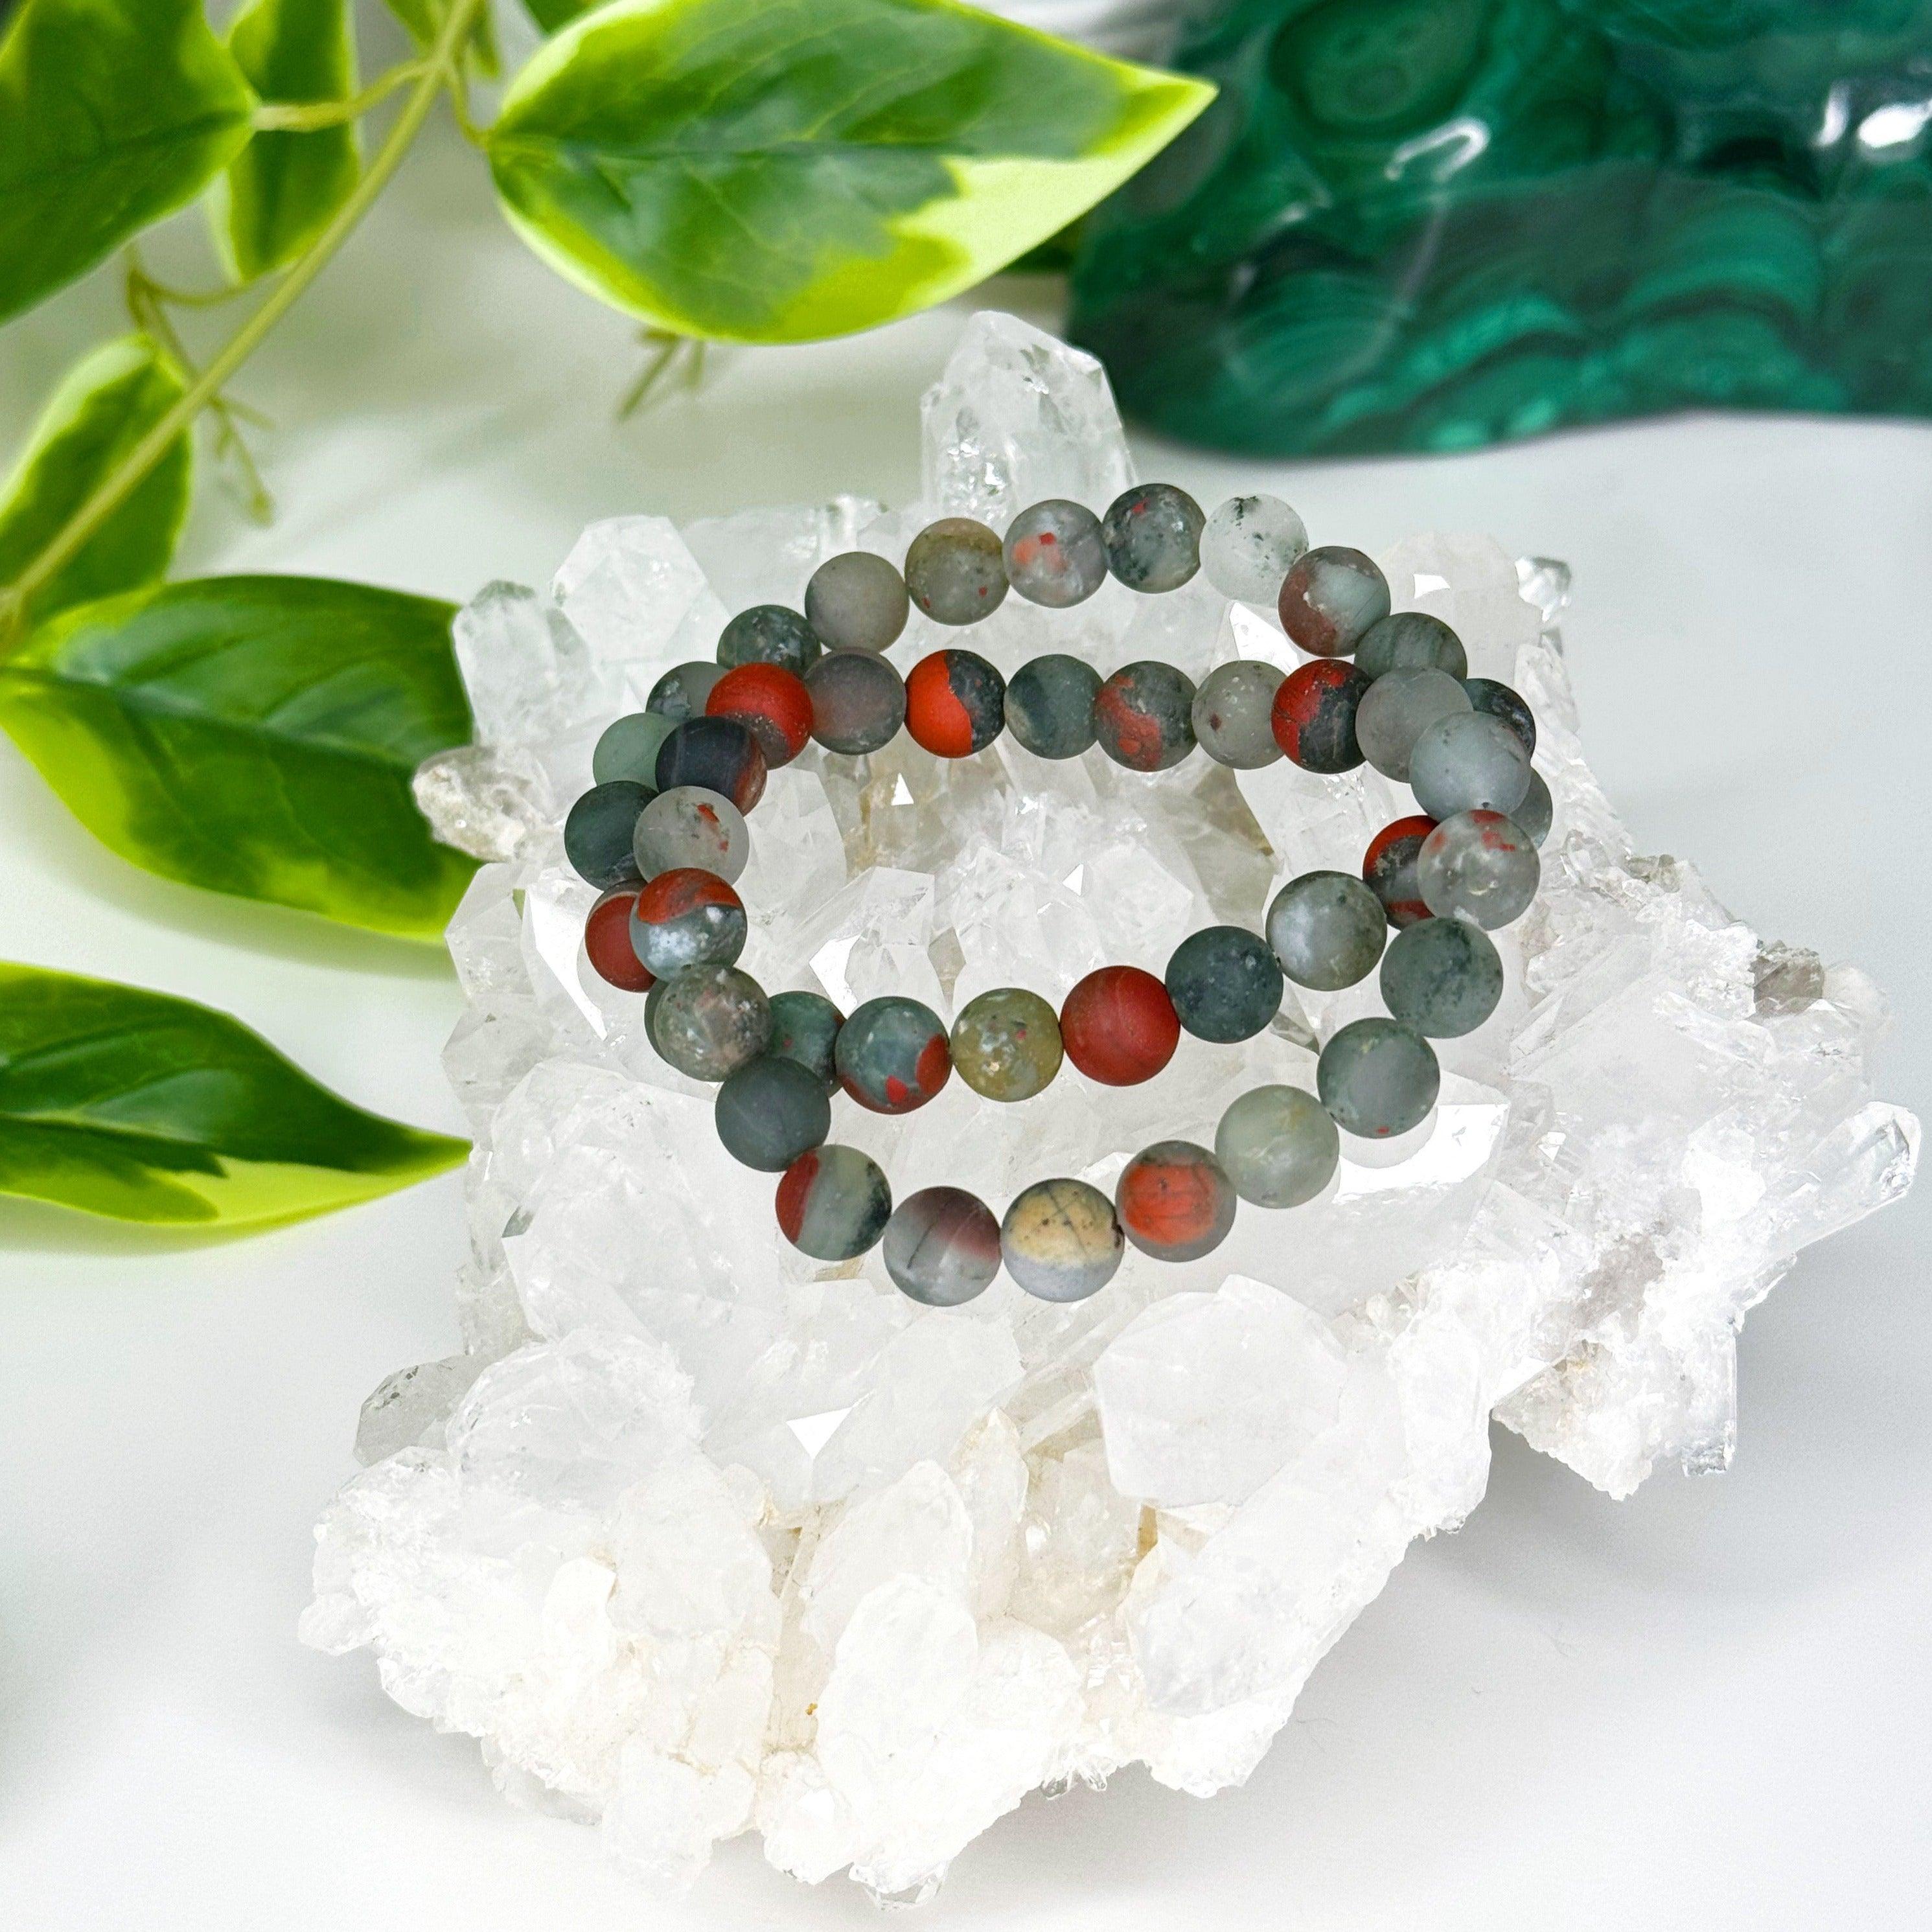 AFRICAN BLOODSTONE (MATTE) 8mm - HANDMADE CRYSTAL BRACELET - 8mm, African bloodstone, Aries, aries stack, bracelet, crystal bracelet, earth, emotional support, Friday the 13th, handmade bracelet, jewelry, june wrist candy, libra, libra stack, market bracelet, matte, mixed colors, pisces, pisces stack, protection gift bundle, recently added, restocked, scorpio stack, summer wrist candy, Wearable - The Mineral Maven